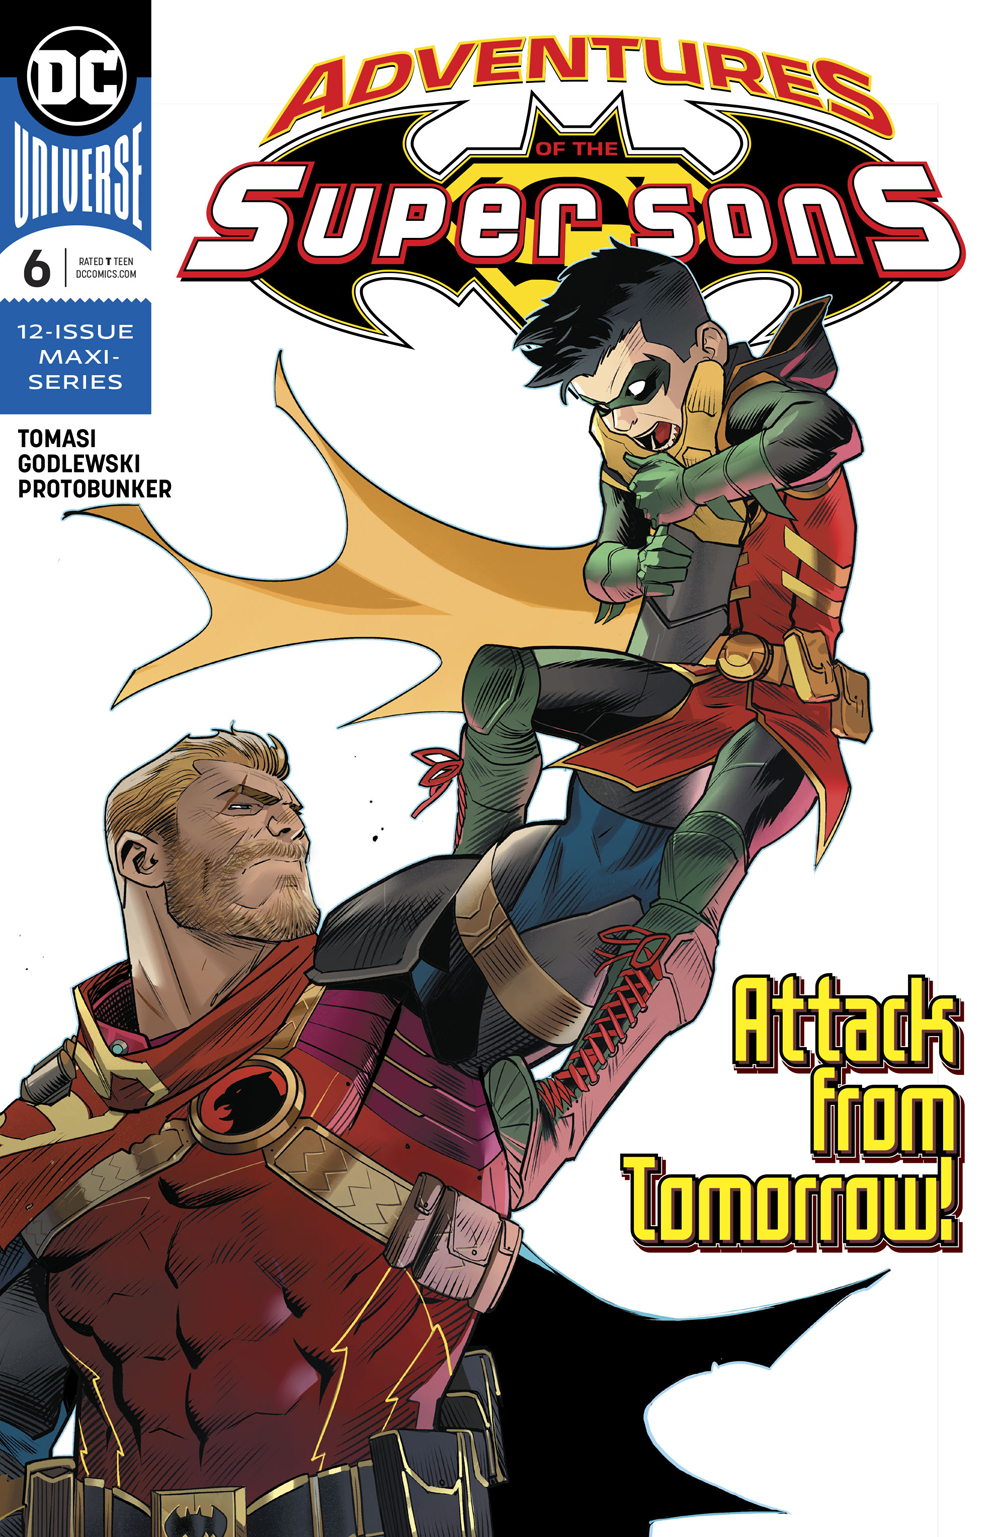 Adventures of the Super Sons no. 6 (6 of 12) (2018 Series)